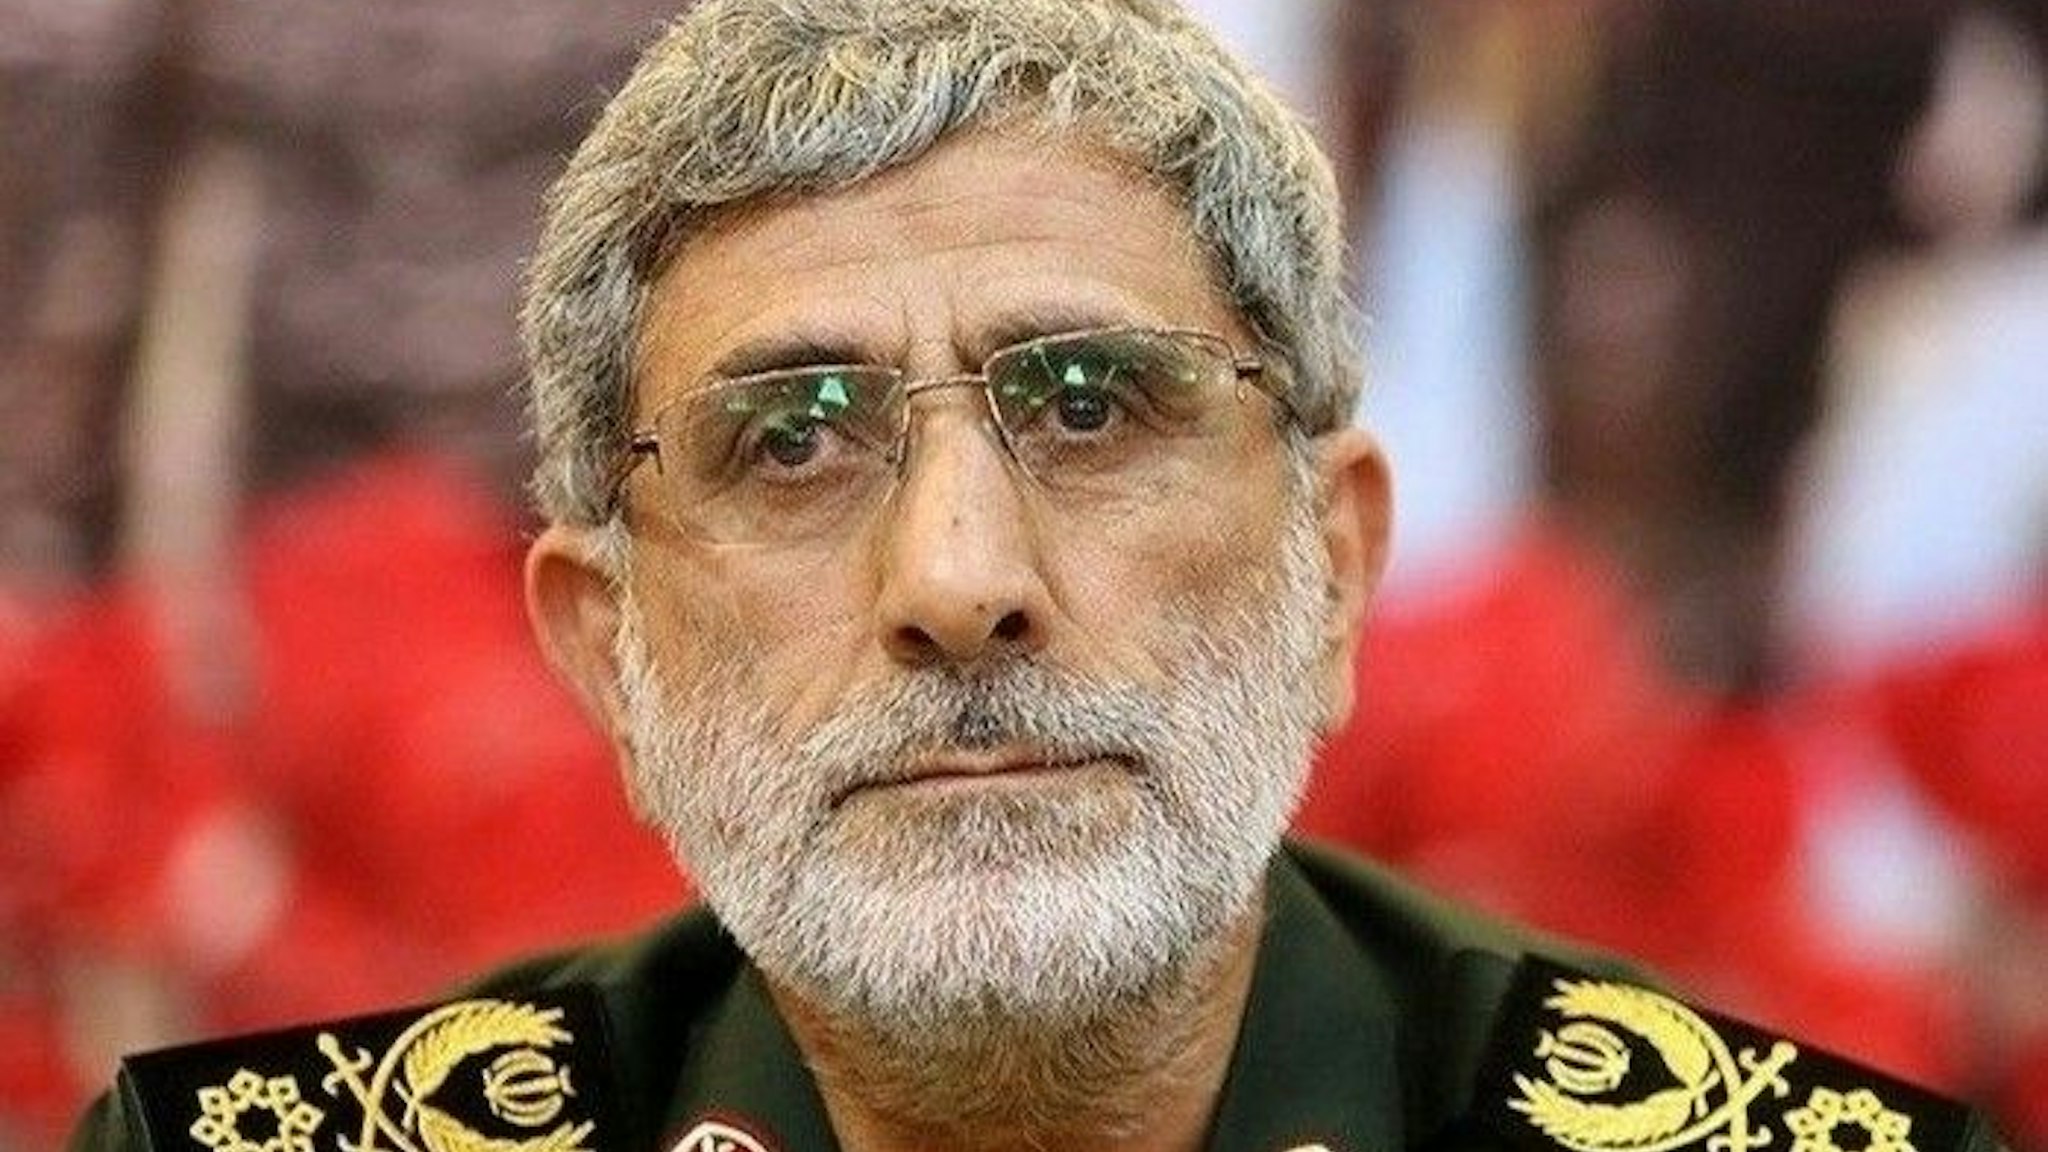 A handout photo shows Ismail Qaani after he has been appointed as commander of the Iranian Revolutionary Guards' Quds Forces after a drone strike near Baghdad International Airport killed Qasem Soleimani, on January 3, 2020 in Tehran, Iran.